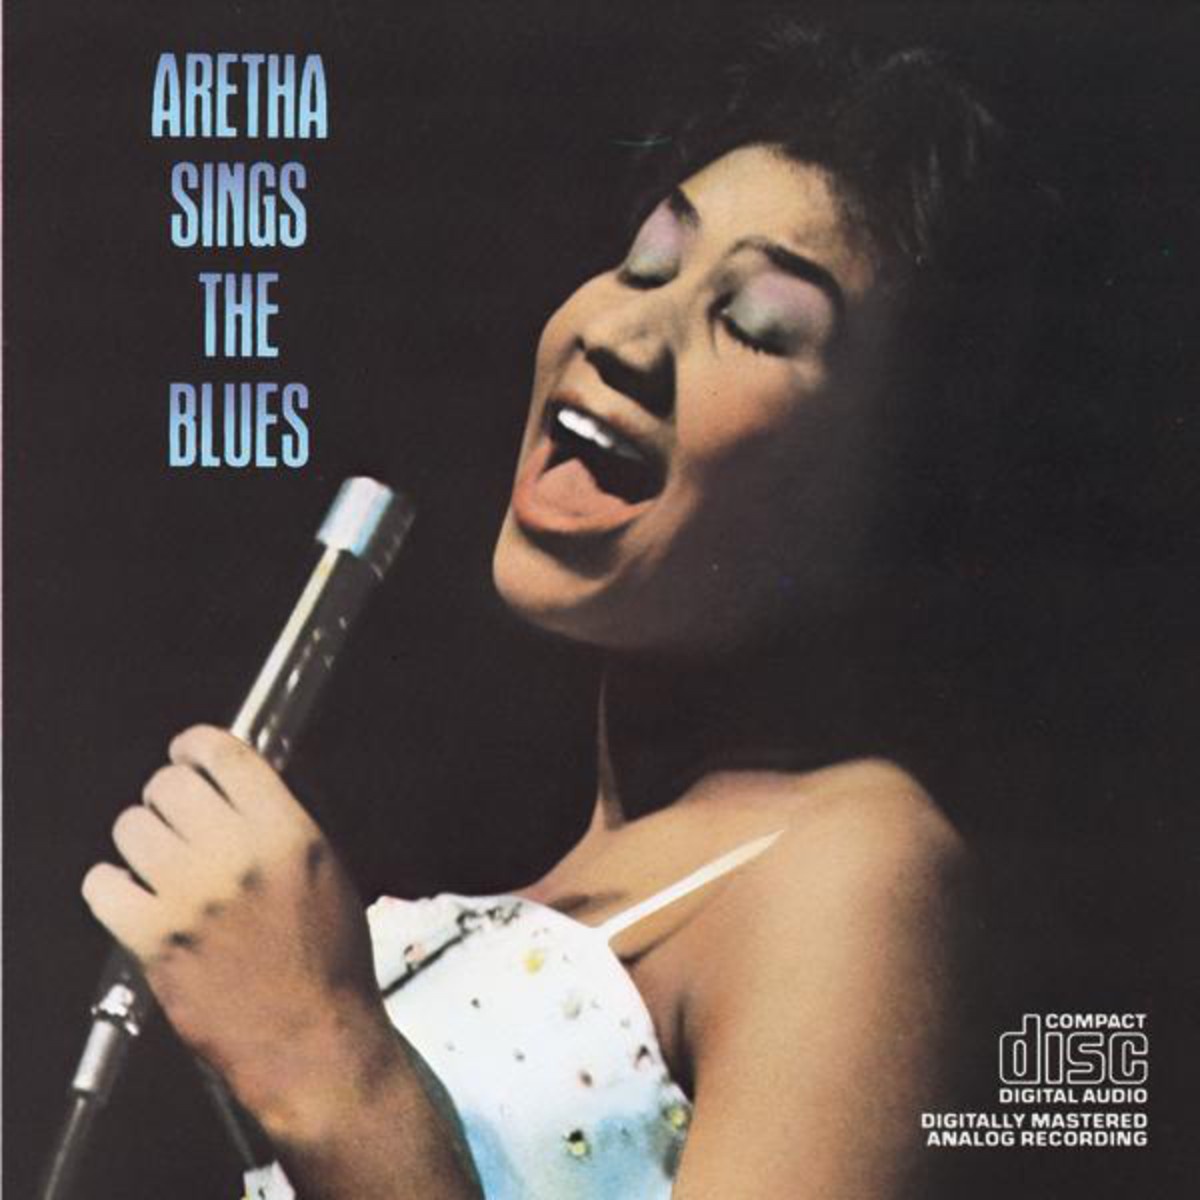 Today I Sing The Blues - Single Version